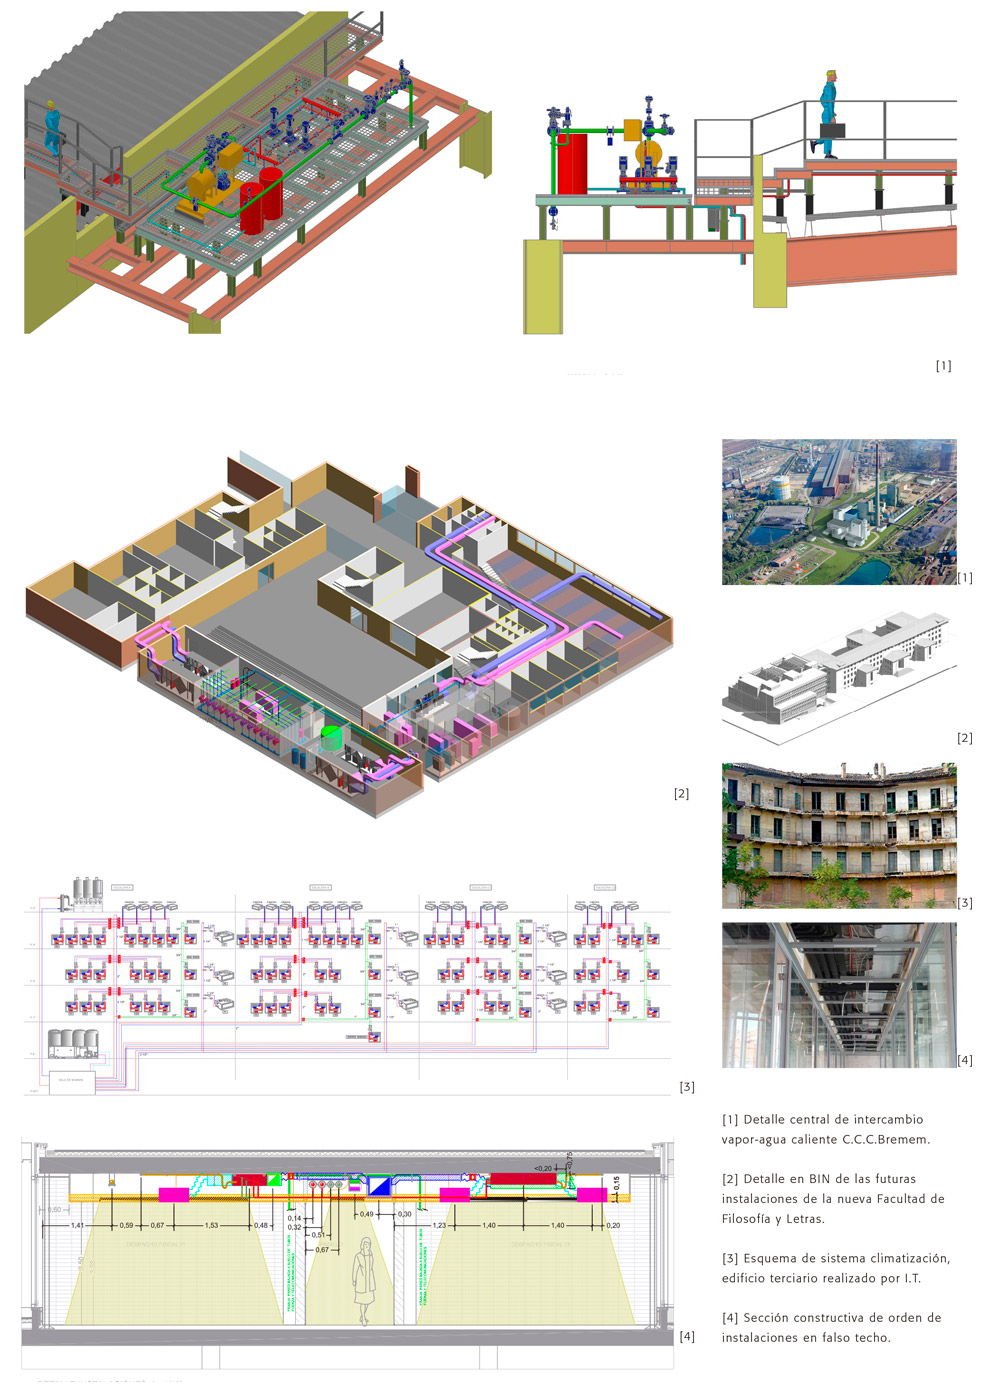 Design and integral implementation of facilities